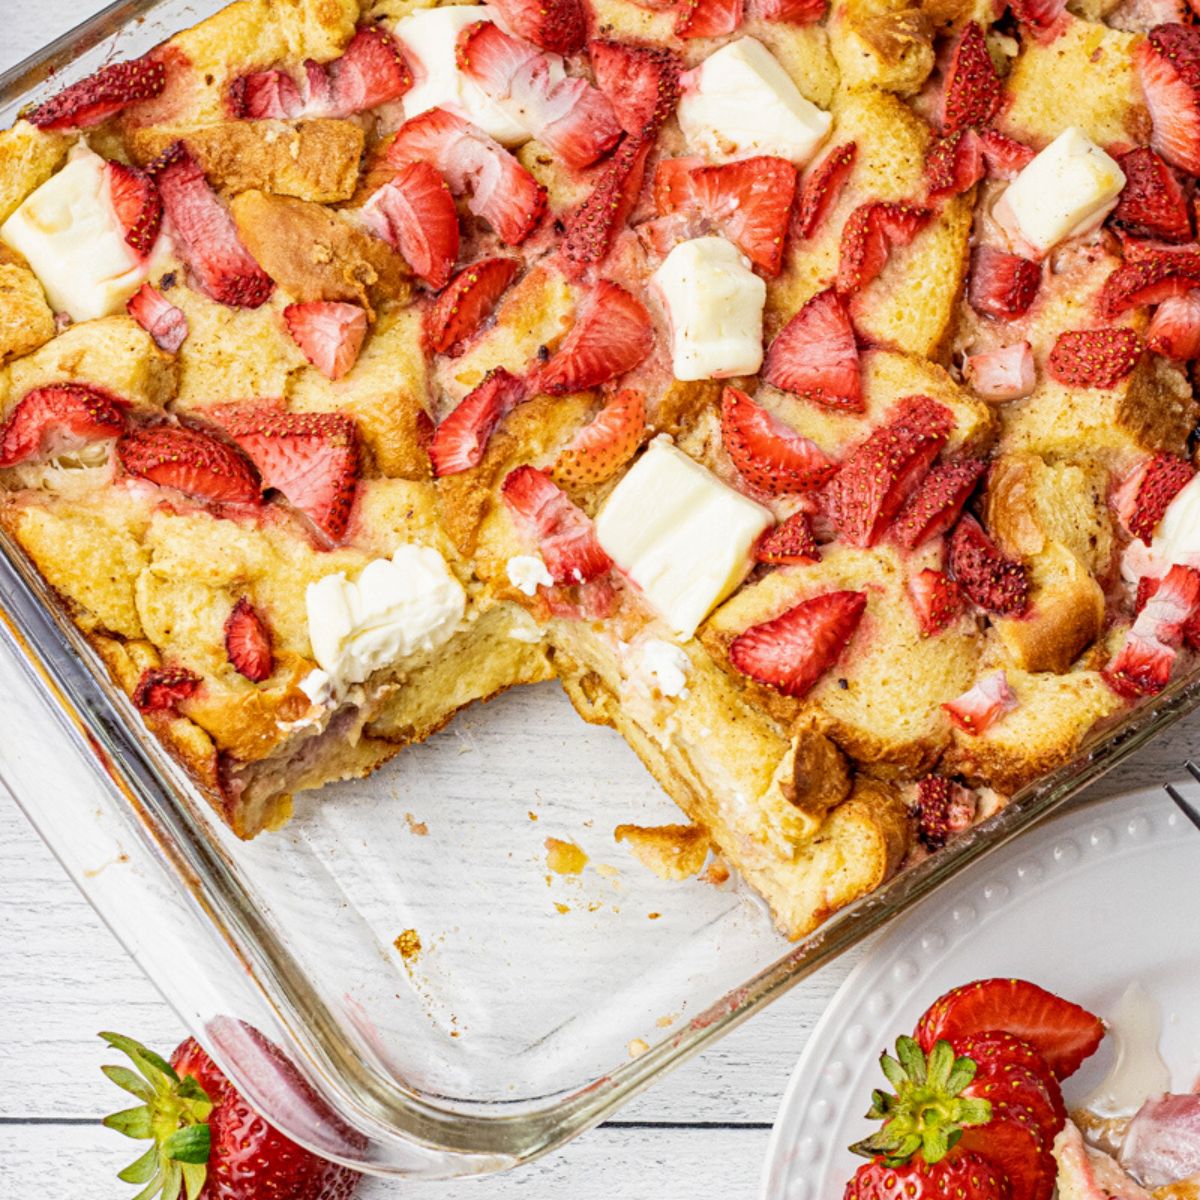 breakfast casserole made with strawberries and cream cheese